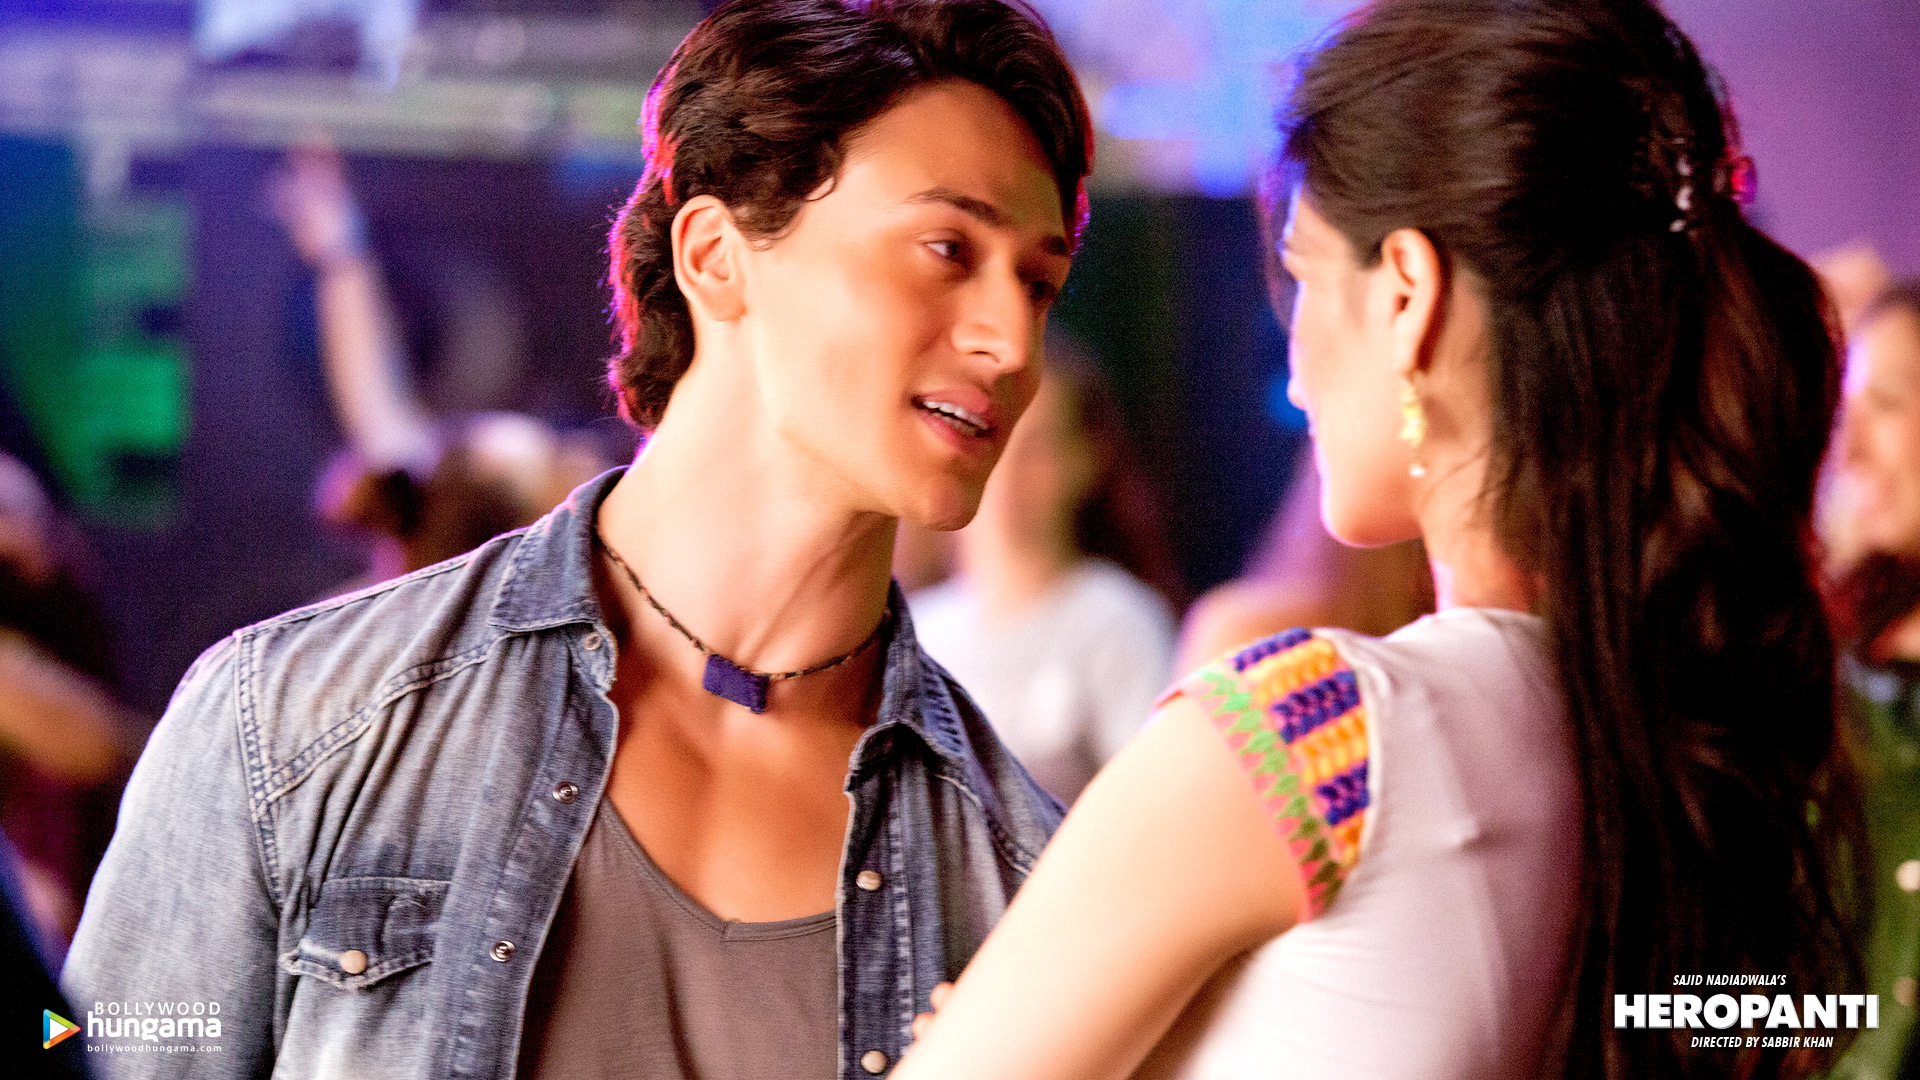 Heropanti Fame Actor Tiger Shroff Wallpapers And Images L